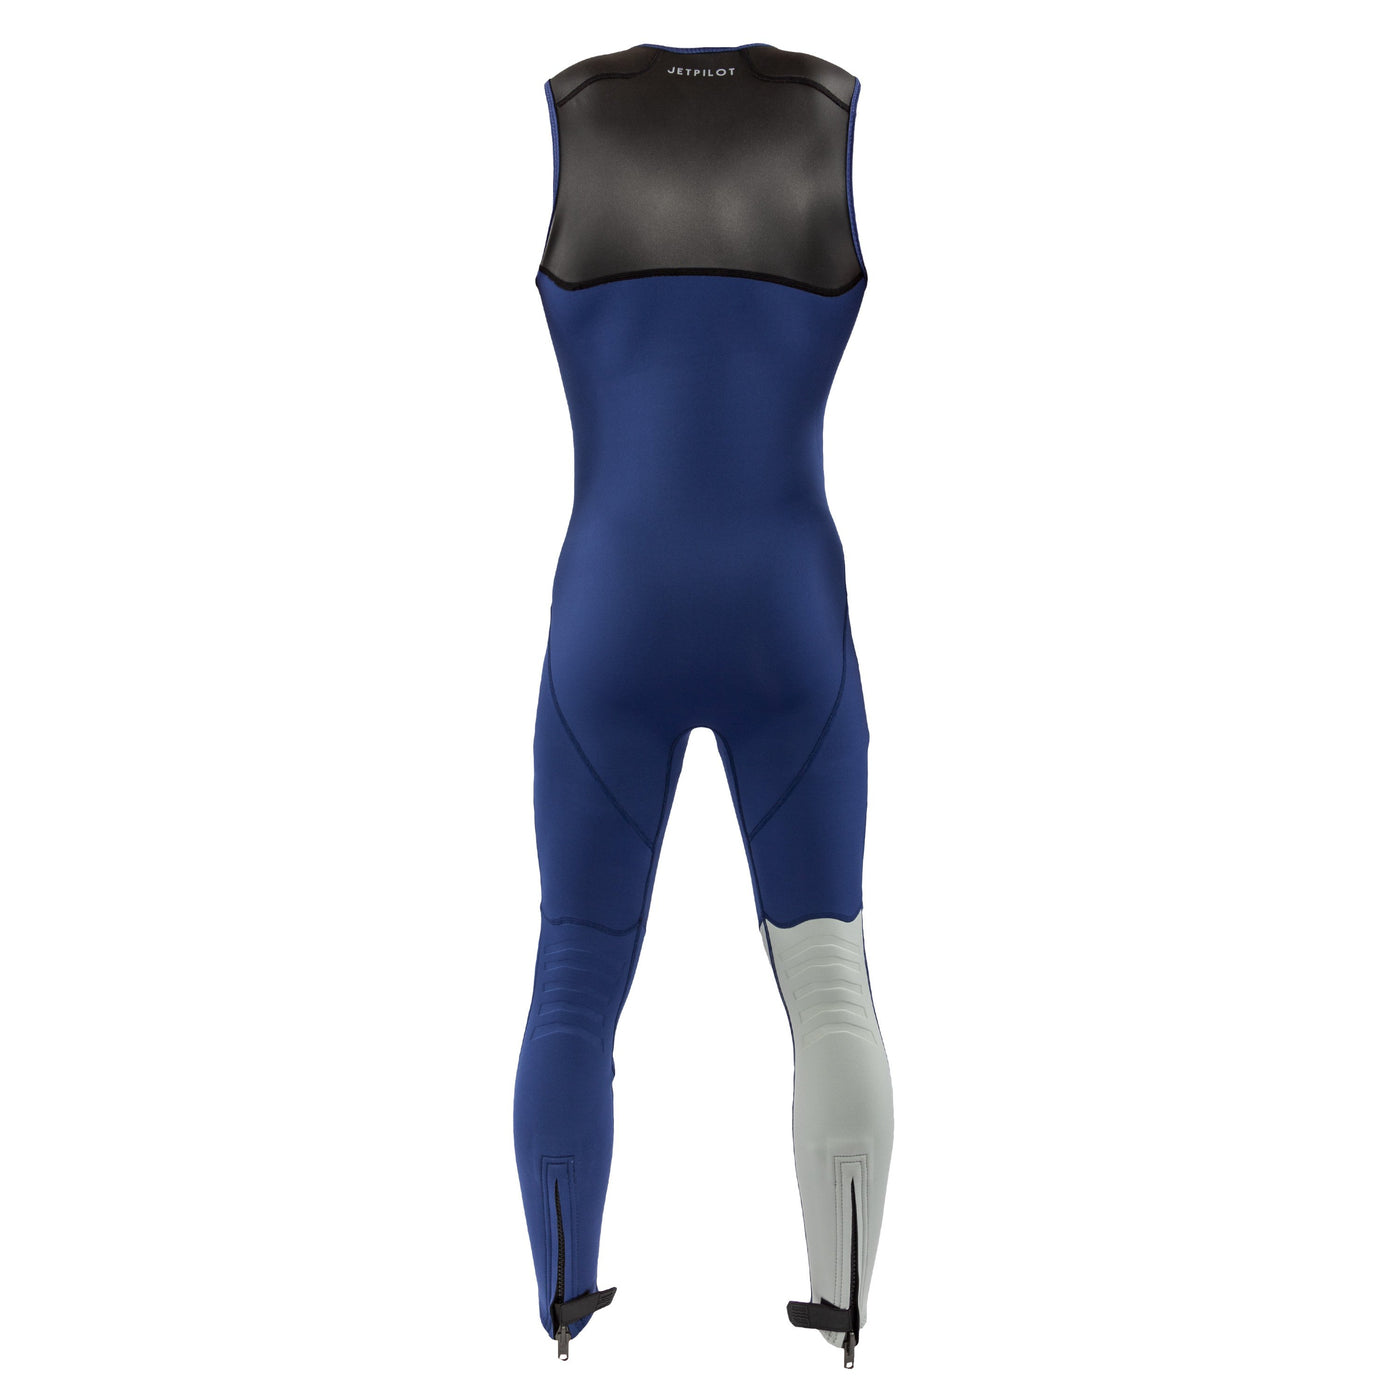 Back view of the Jetpilot L.R.E. John Wetsuit Navy colorway.